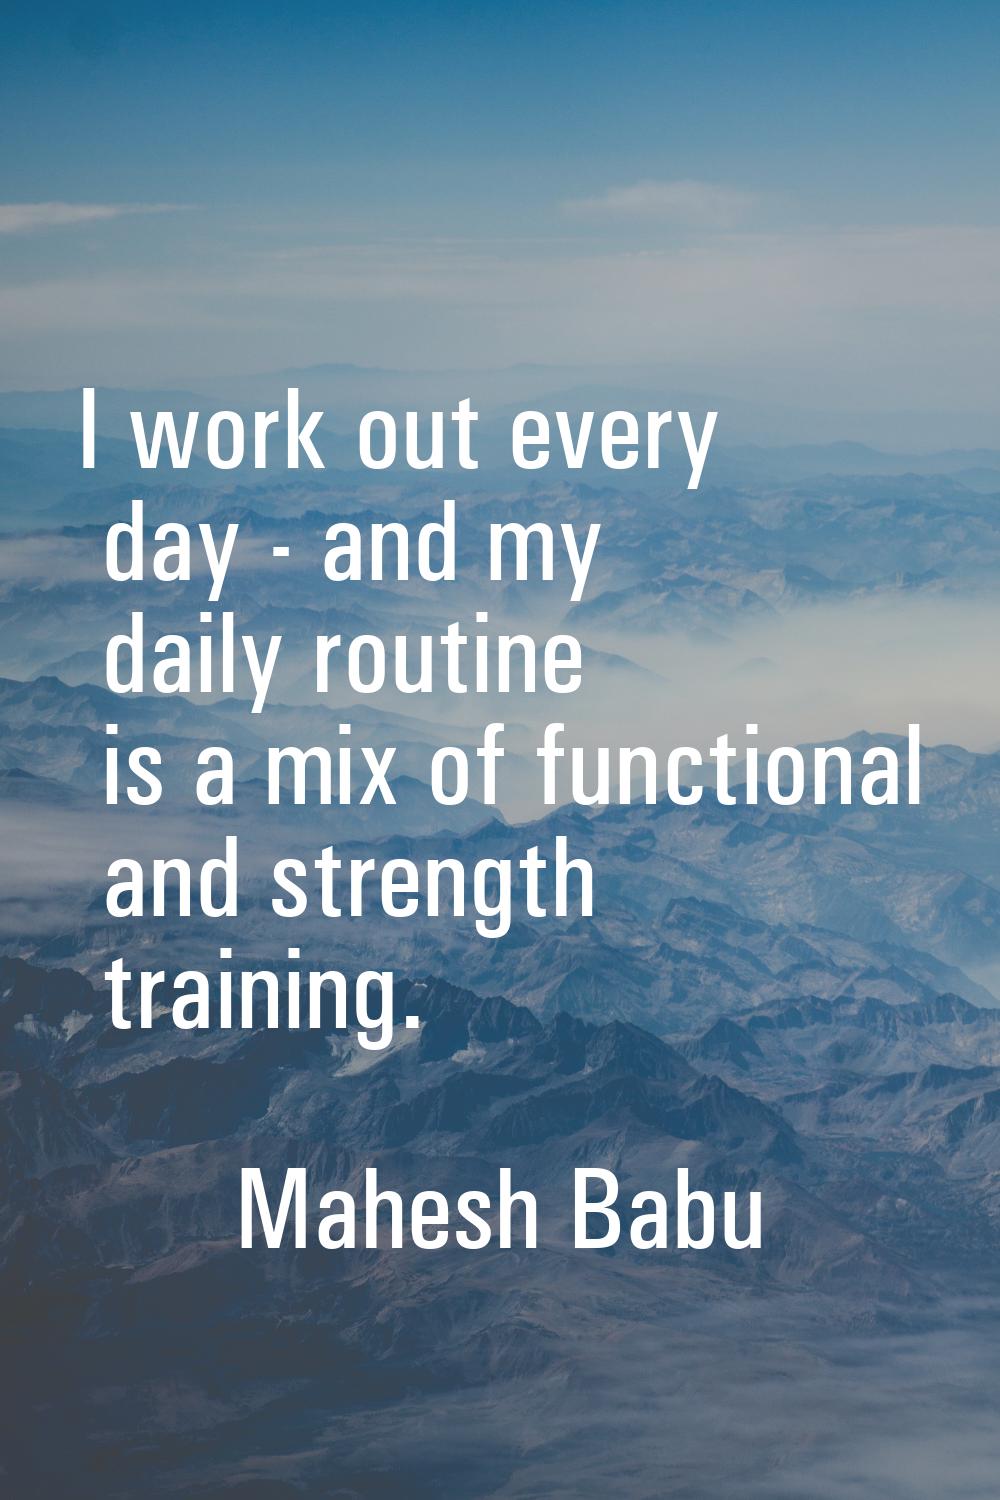 I work out every day - and my daily routine is a mix of functional and strength training.